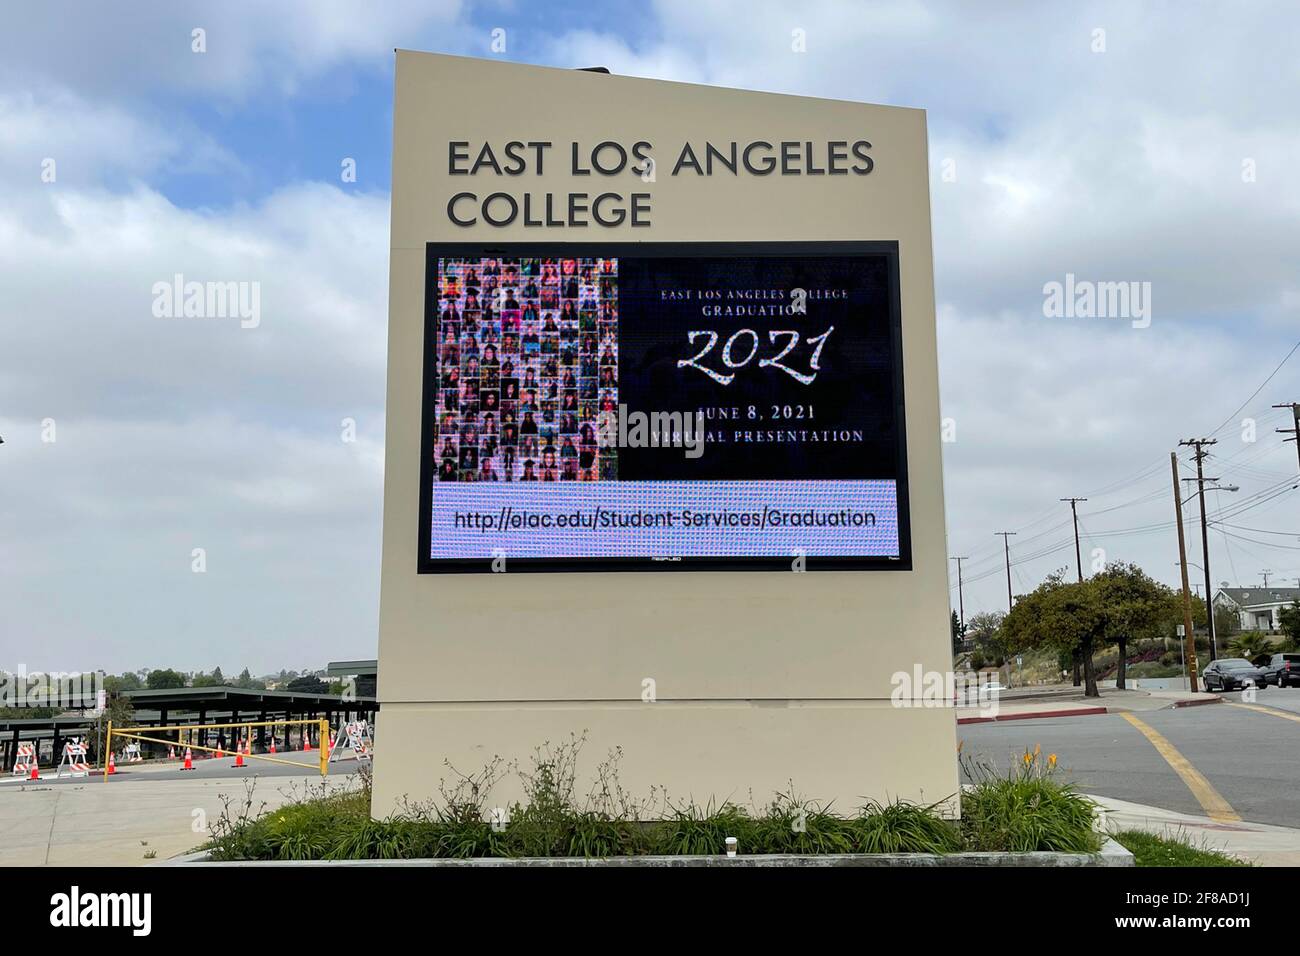 A 2021 Virtual Graduation message on the marquee sign at East Los Angeles College, Monday, April 12, 2021, in Monterey Park, Calif. Stock Photo